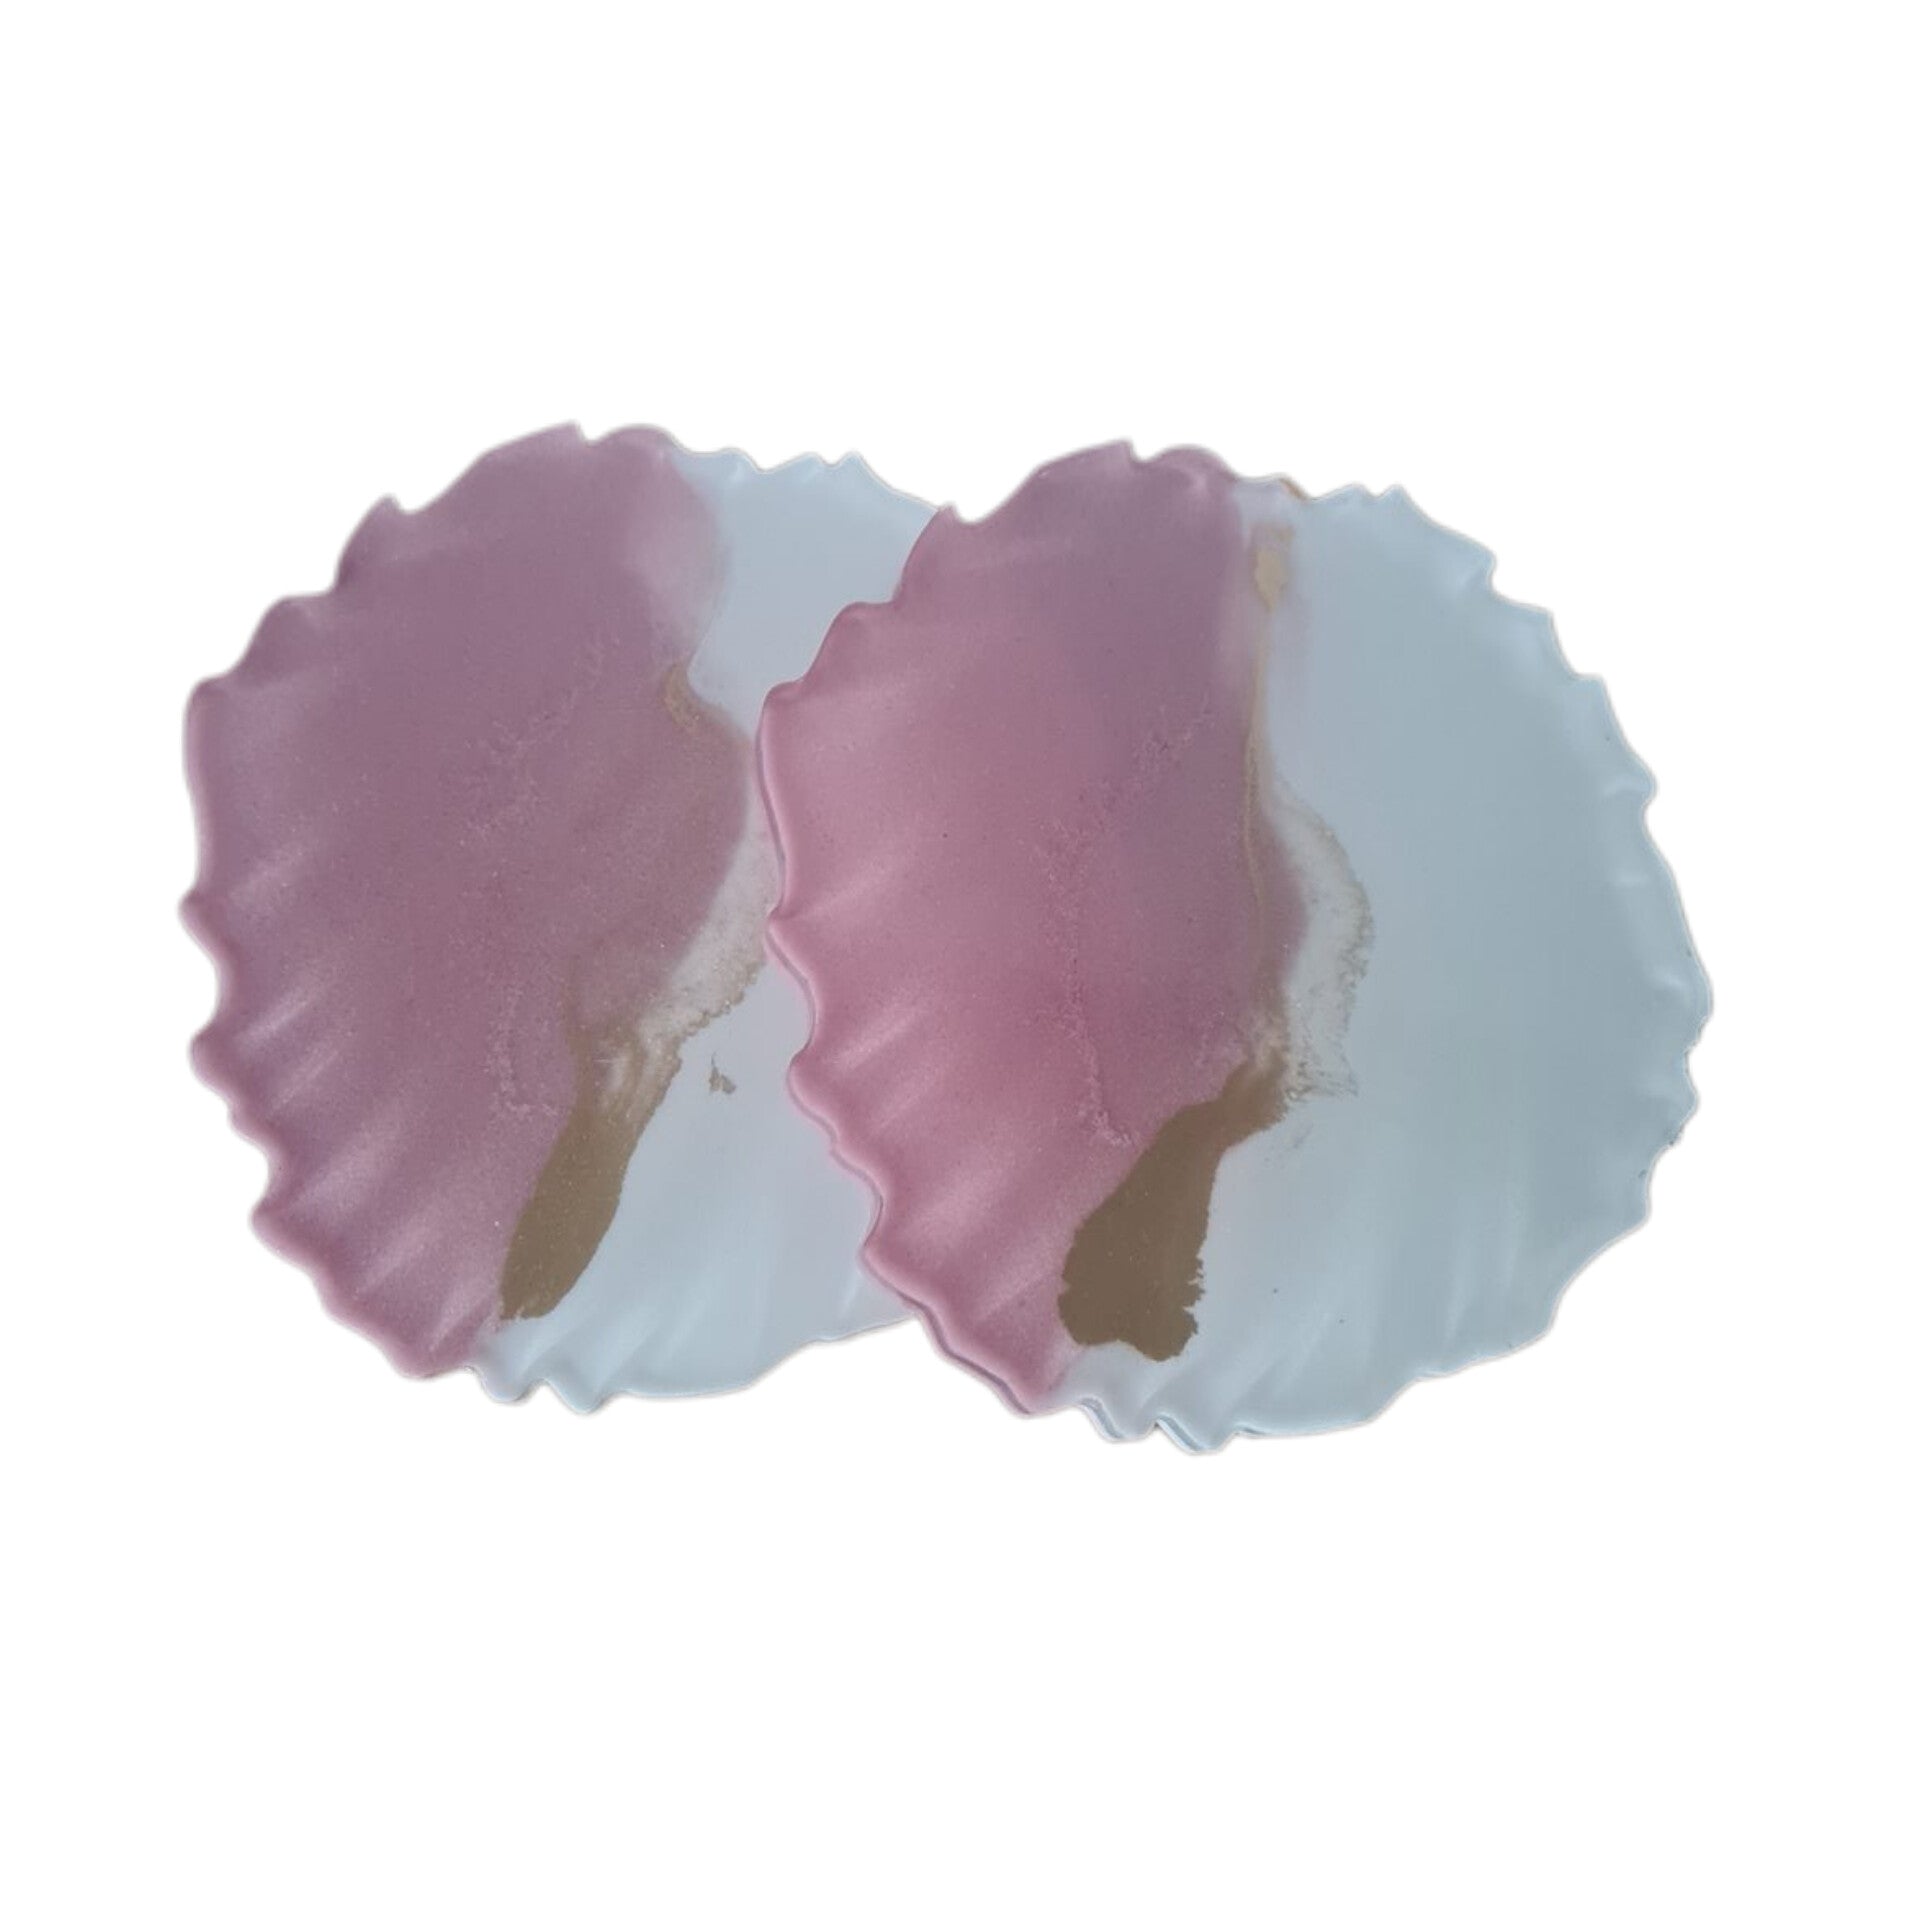 Blush Pink, White and Gold Resin Agate Coaster Set